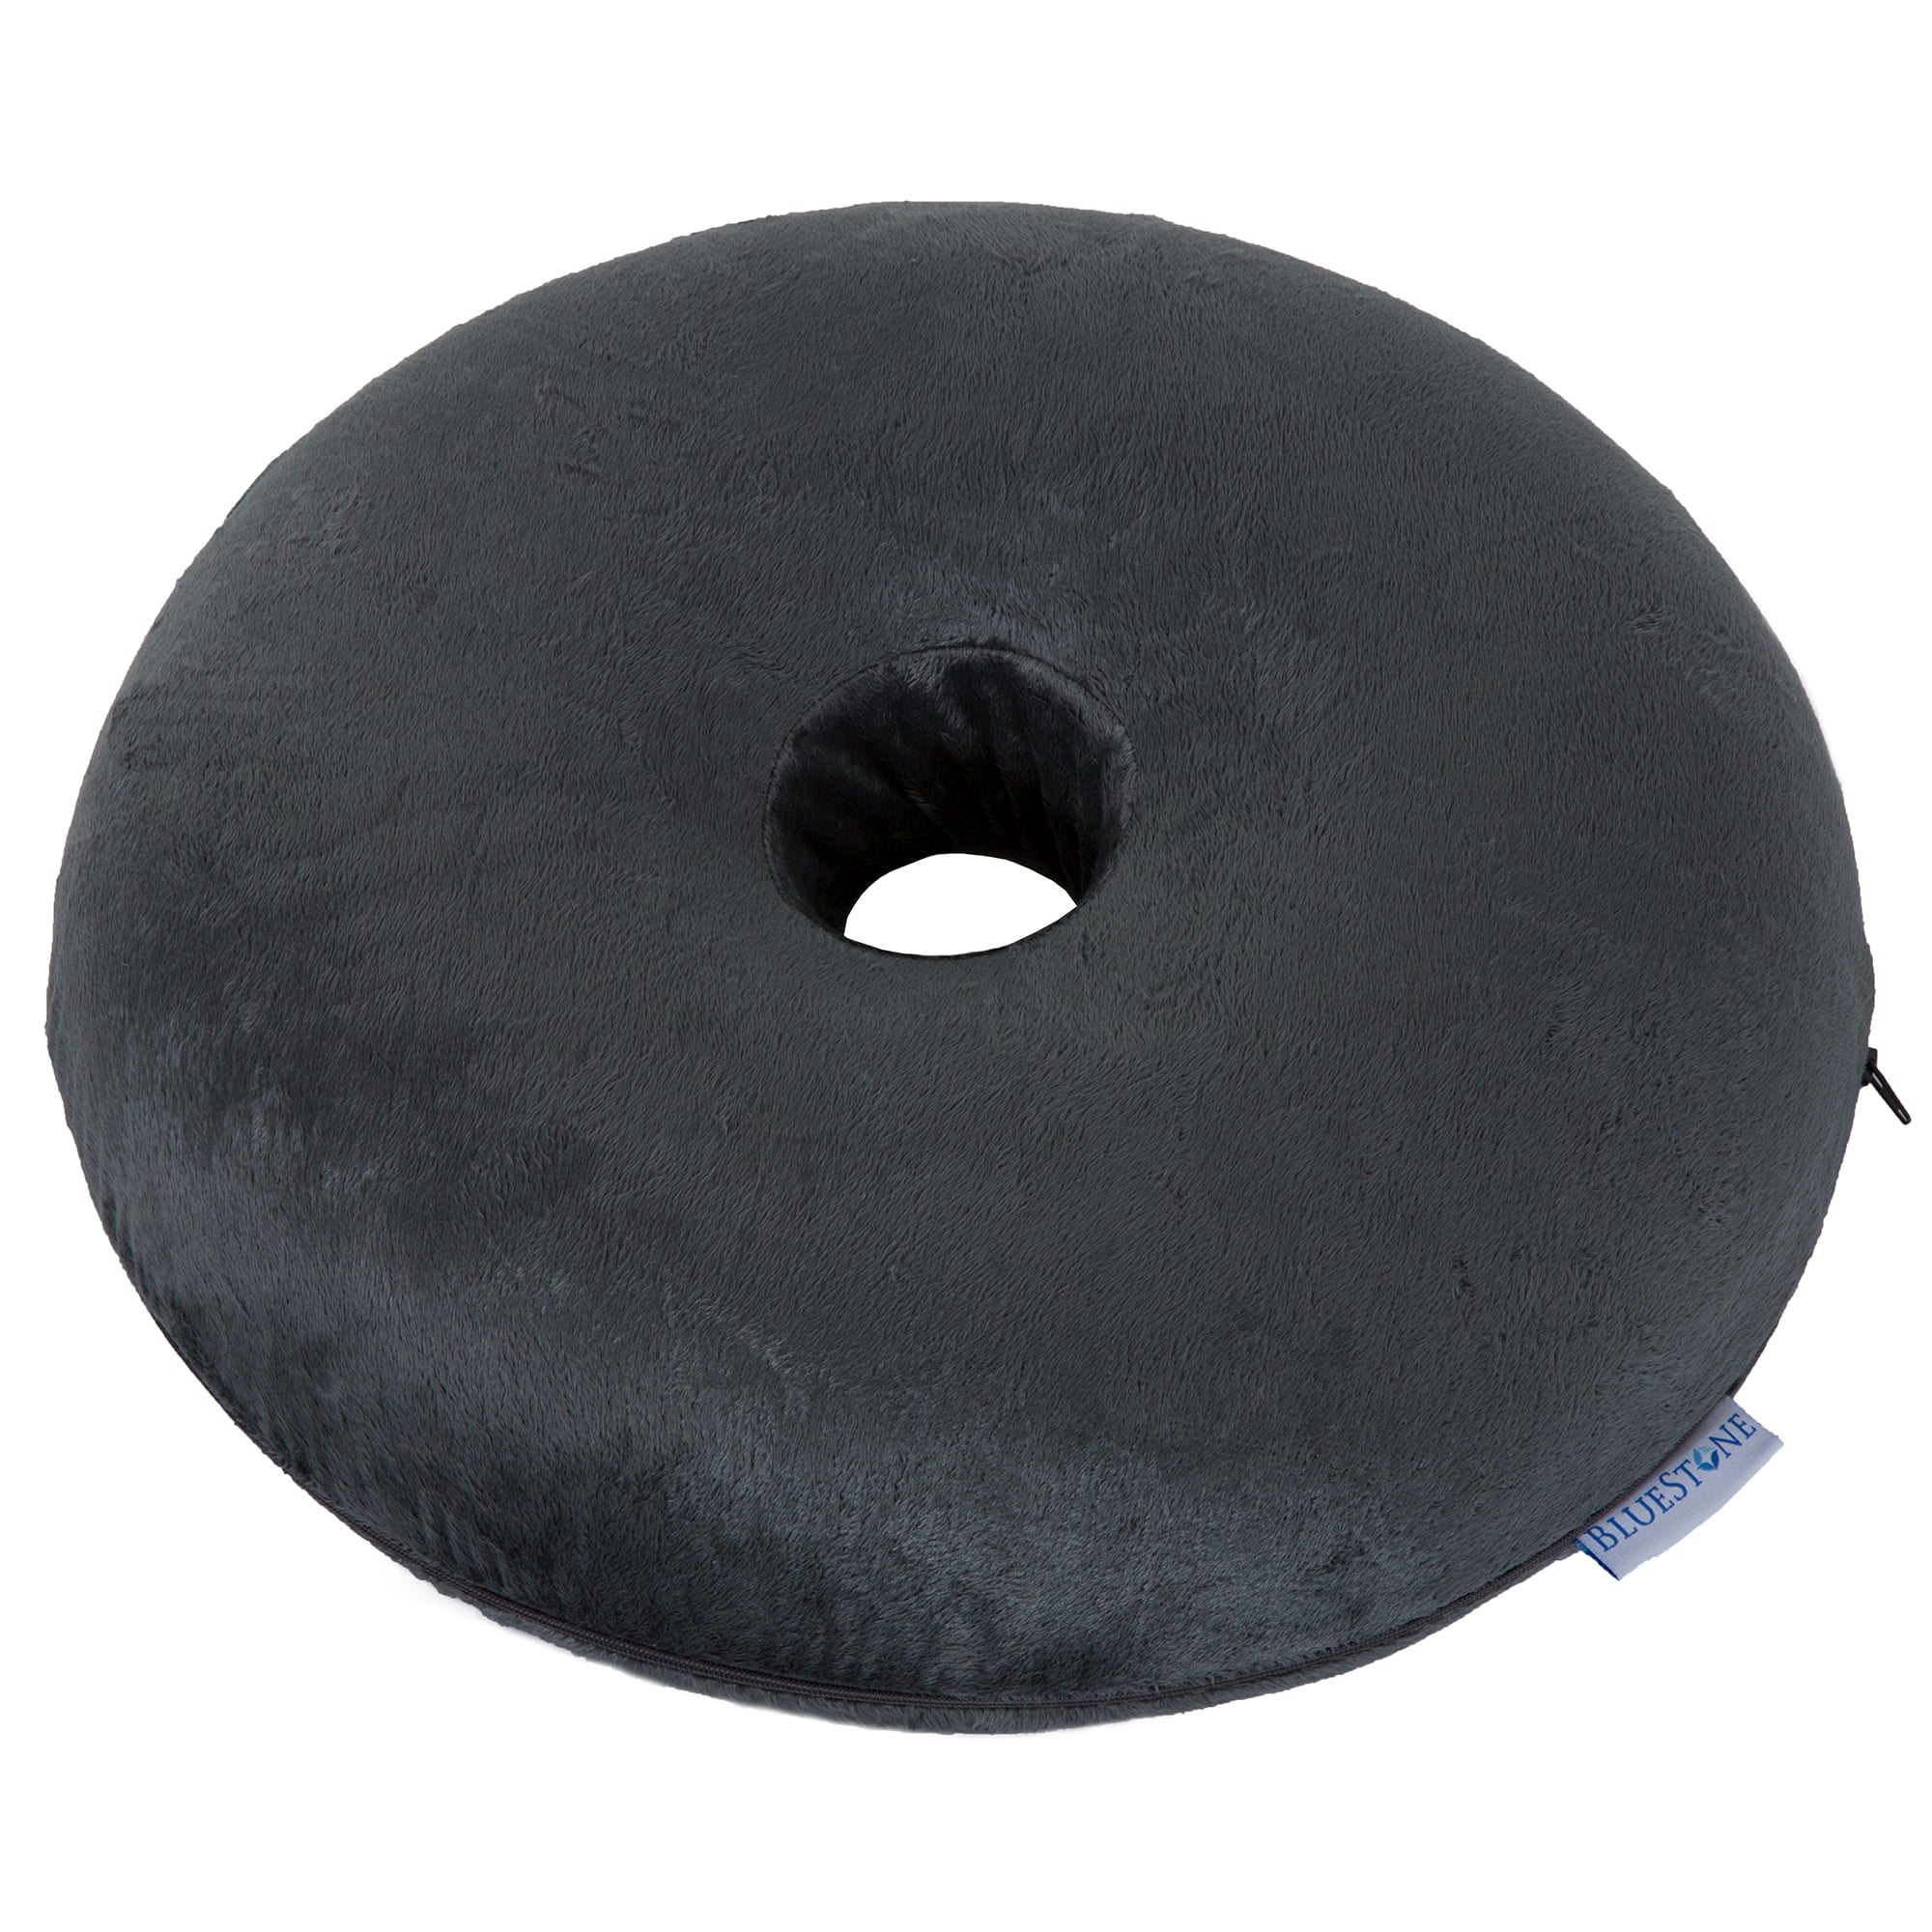 DeluxeComfort Donut Pillow - Best Ring Shaped Memory Foam